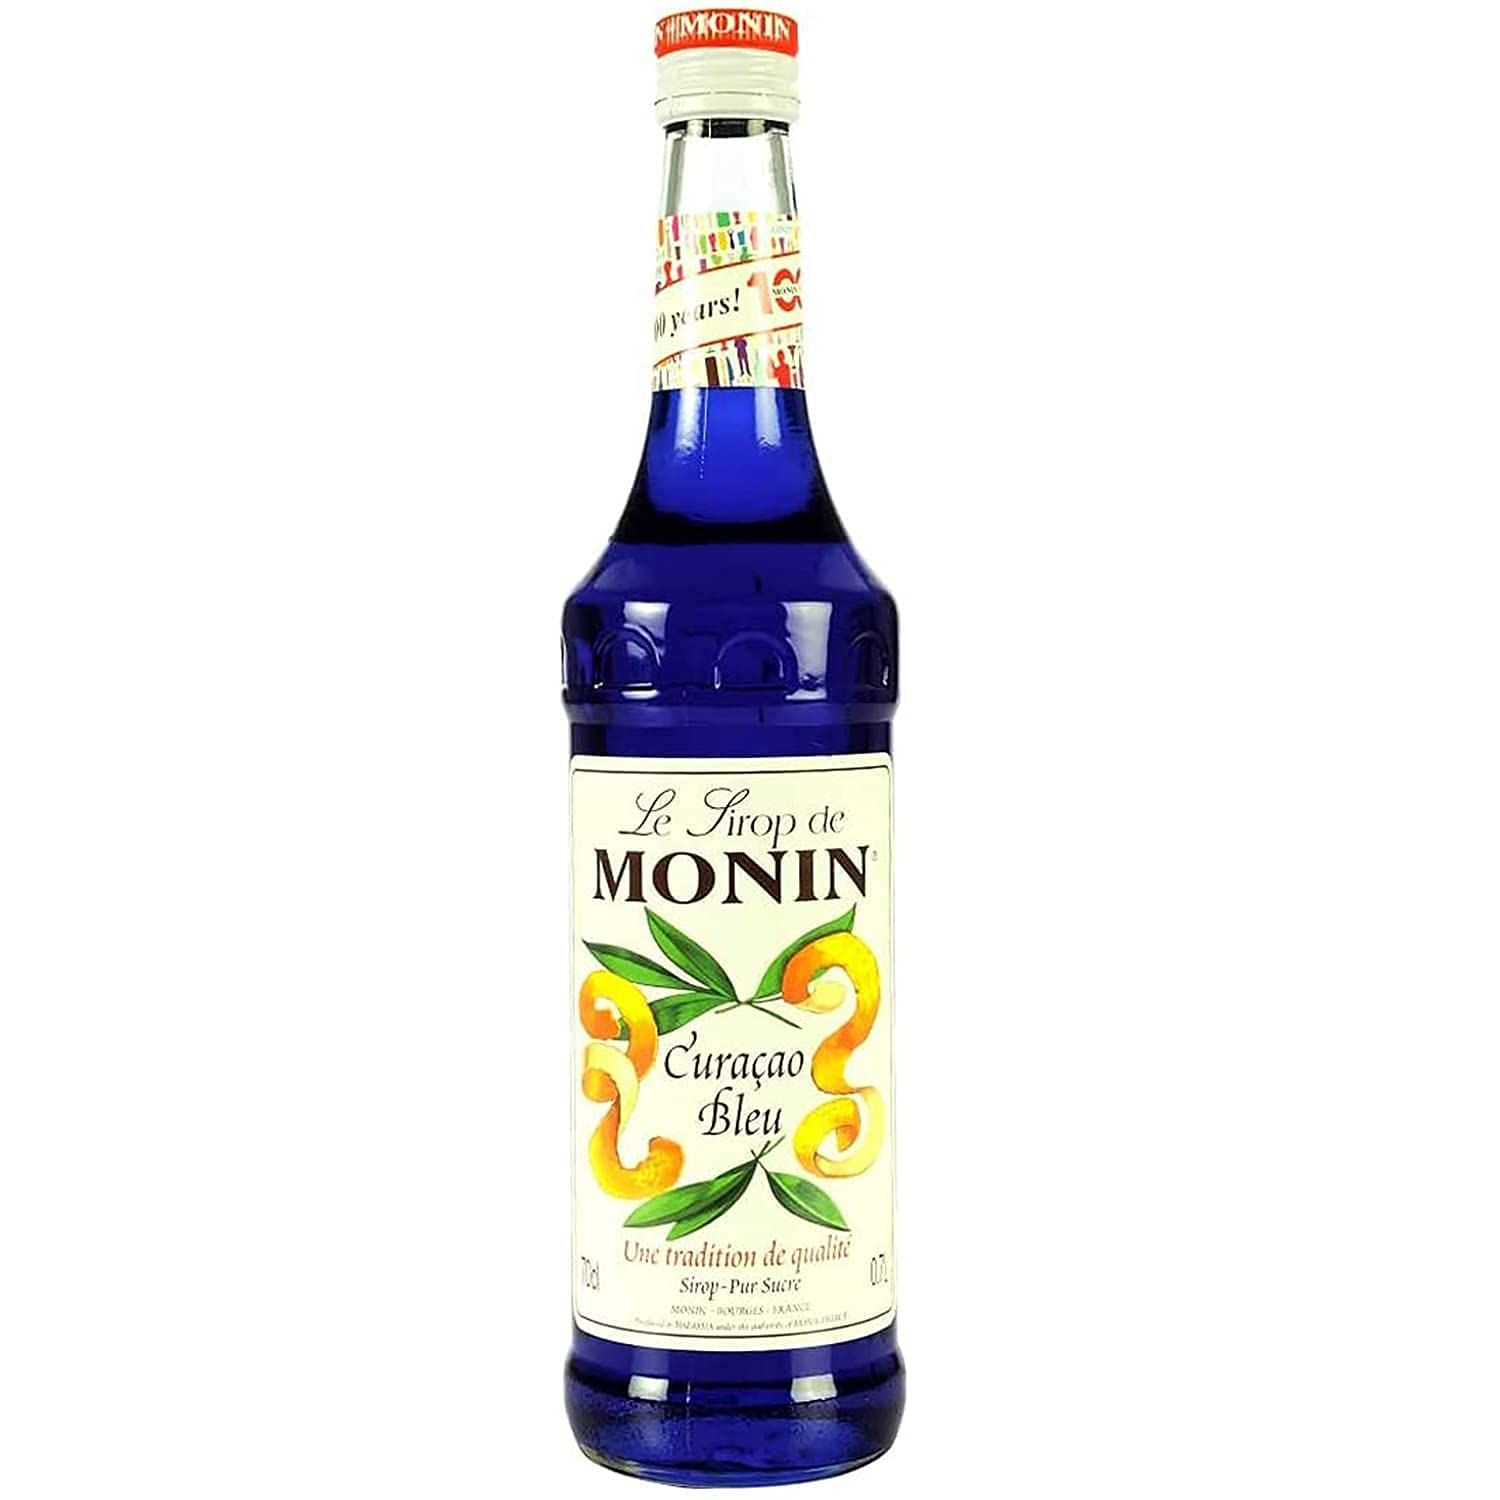 Monin Bright Blue Curacao Flavored Syrup Image